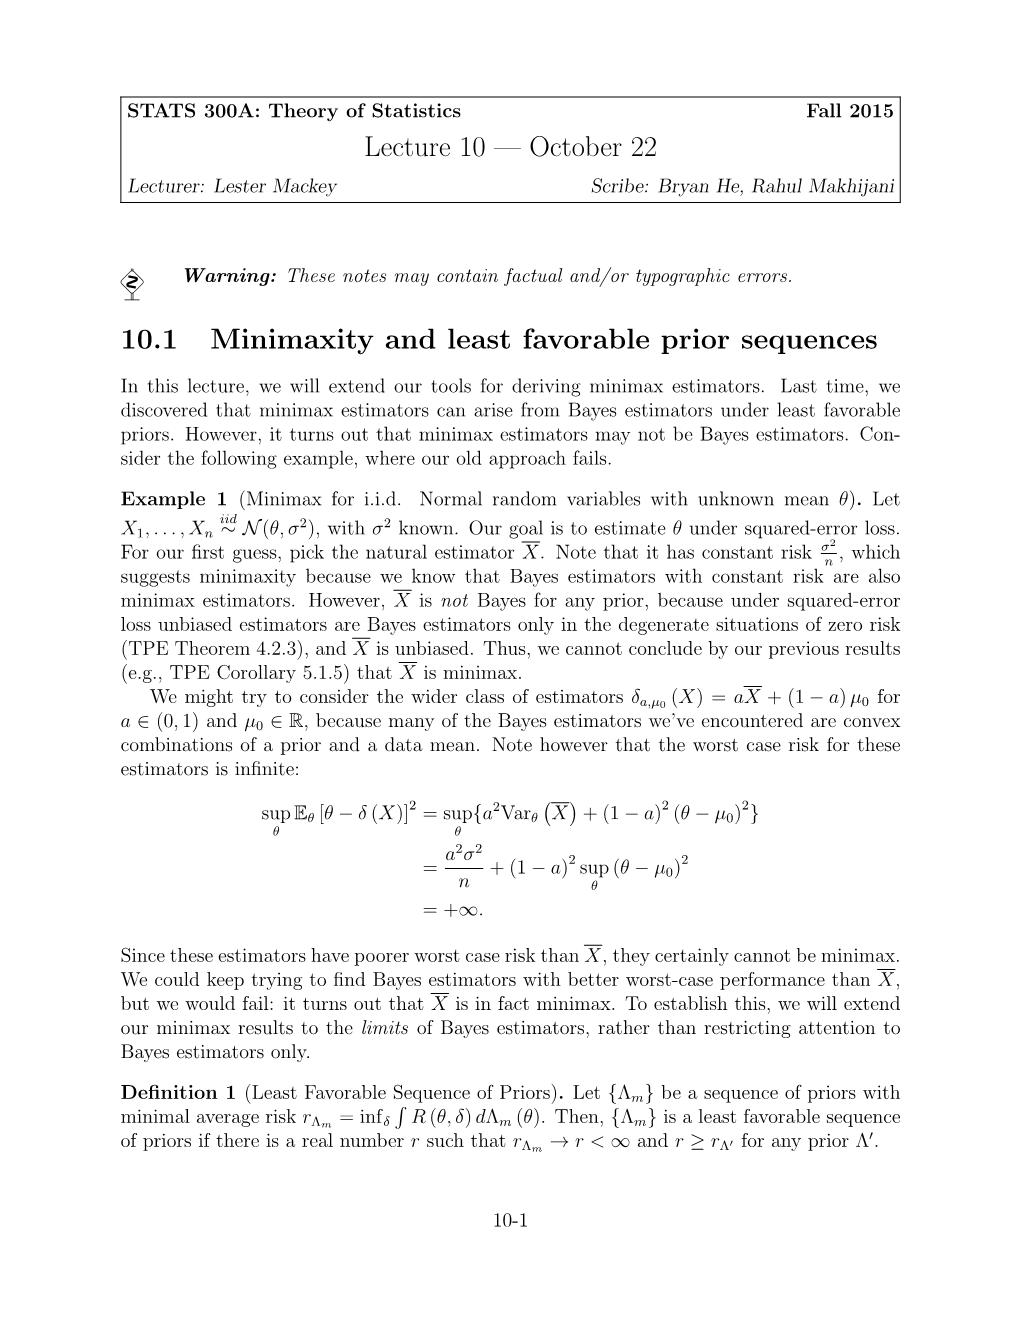 Lecture 10 — October 22 10.1 Minimaxity and Least Favorable Prior Sequences